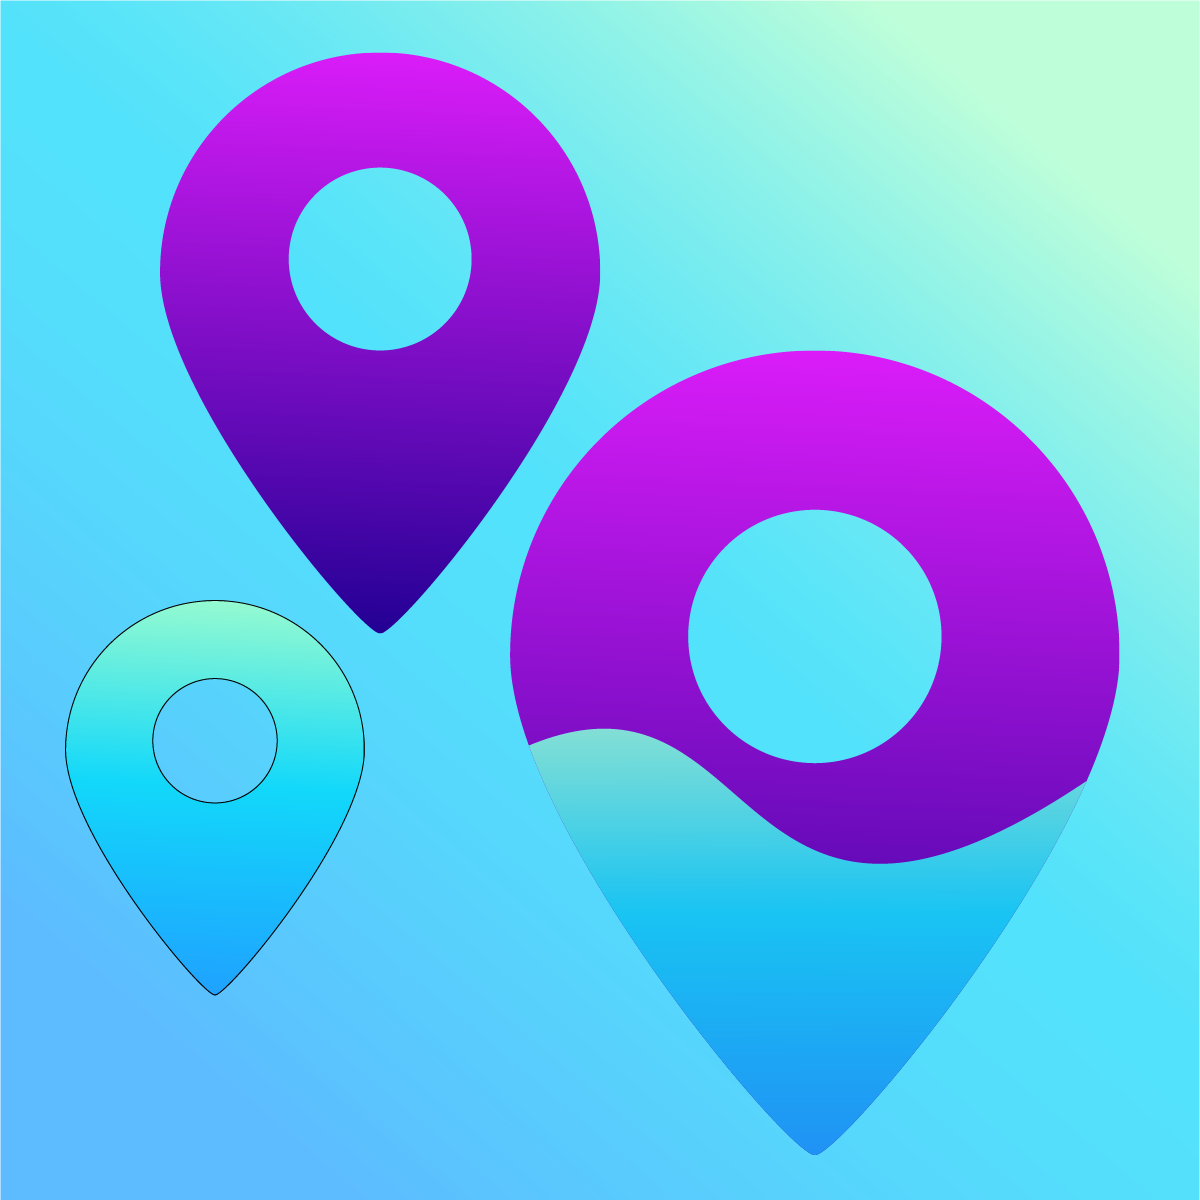 Hire Shopify Experts to integrate Map Insights app into a Shopify store